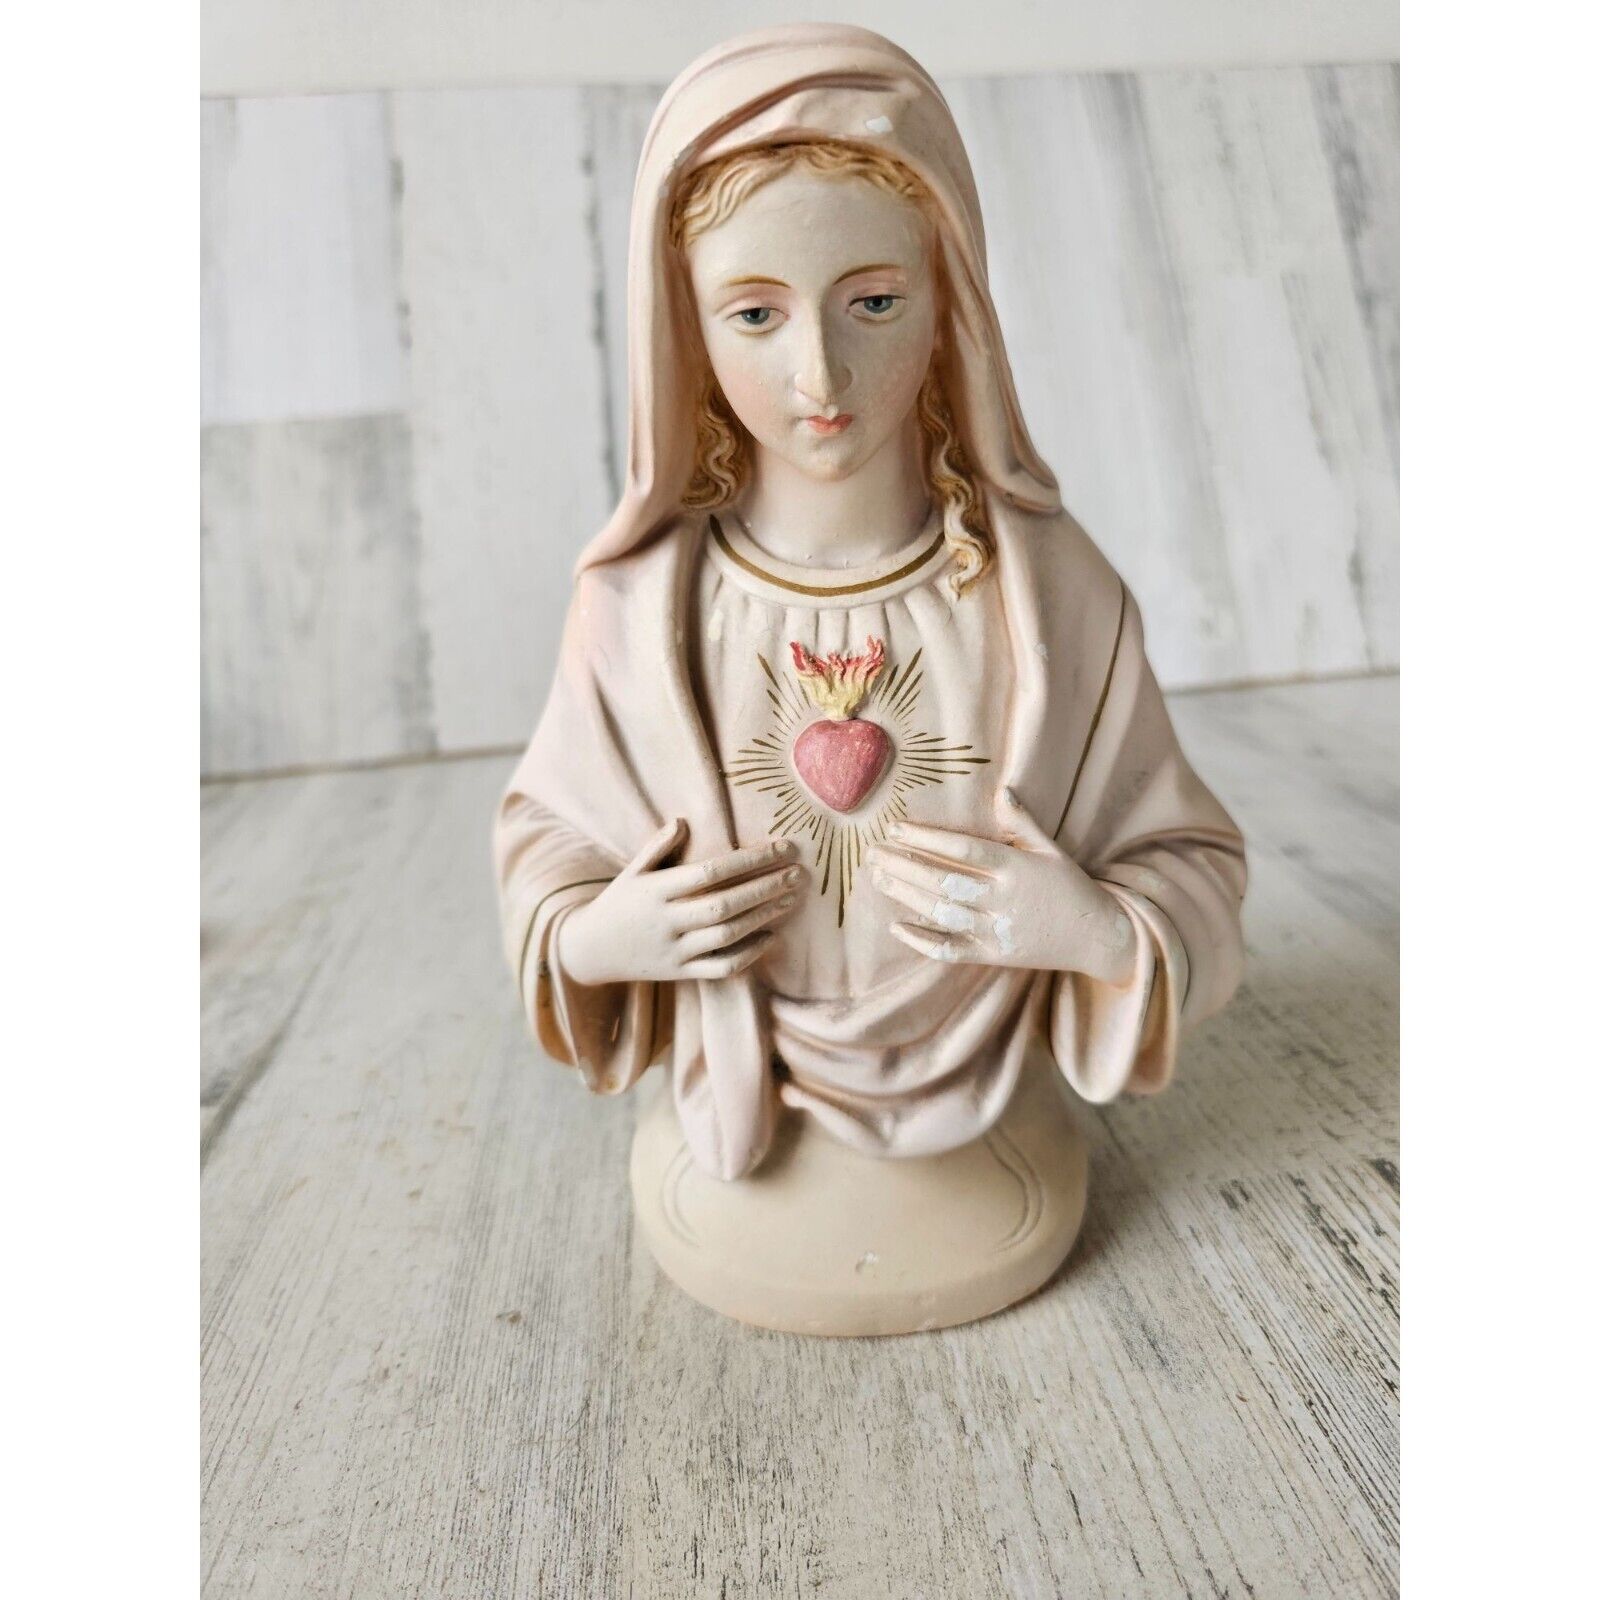 S.h. vintage Virgin Mary chalkware heart bust religious statue figurine